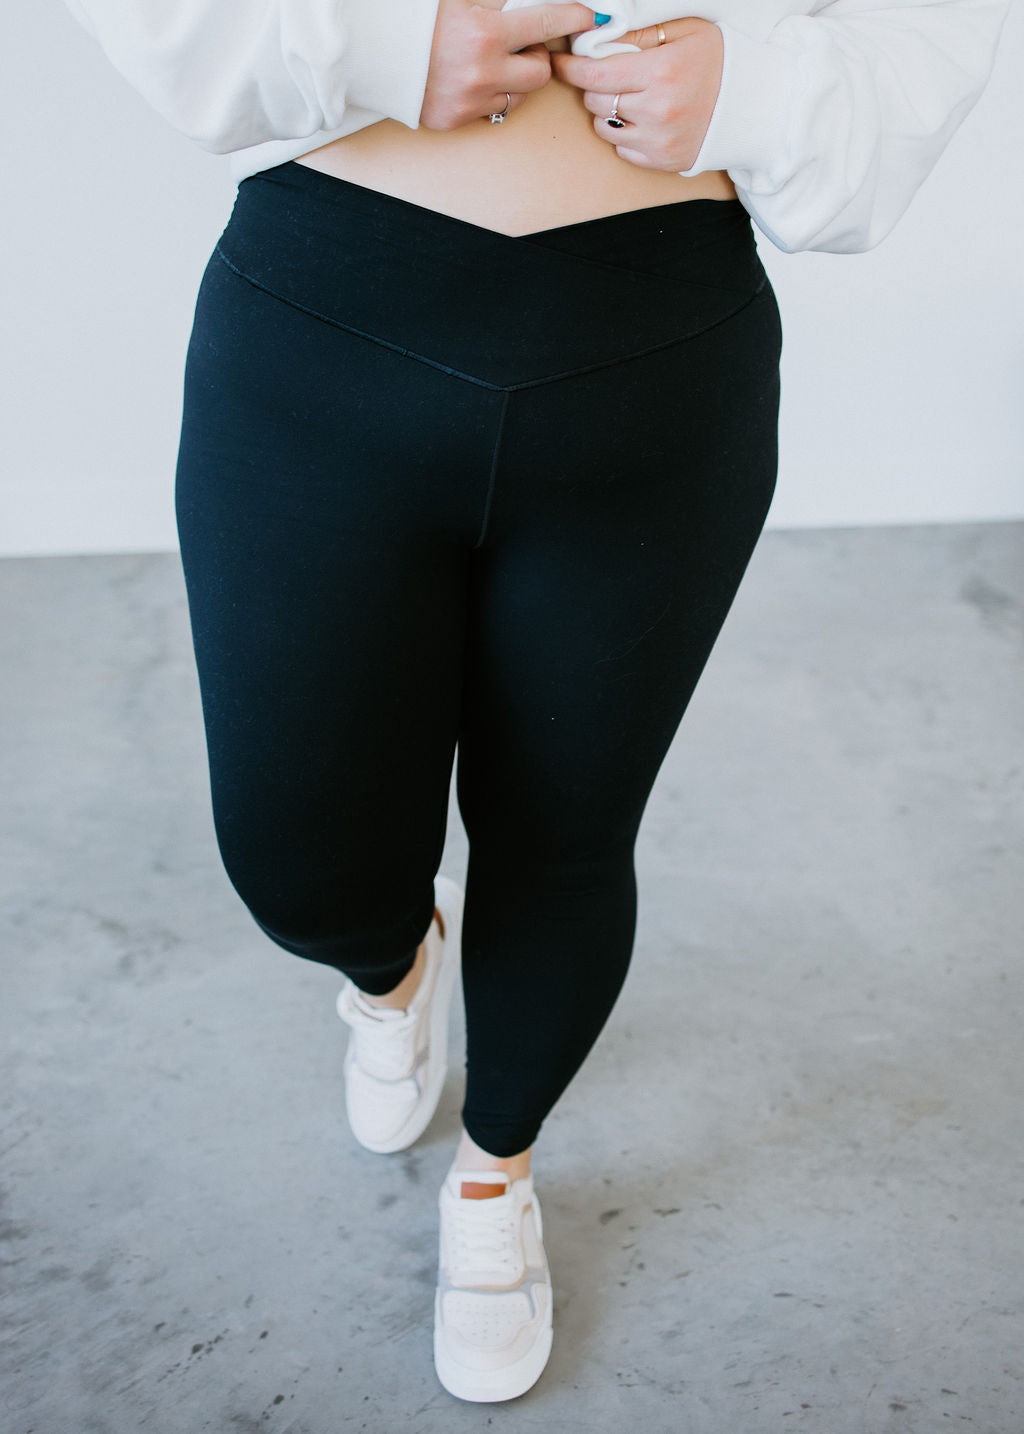 Pear Blossom Crossover Leggings – By Oriana Collection